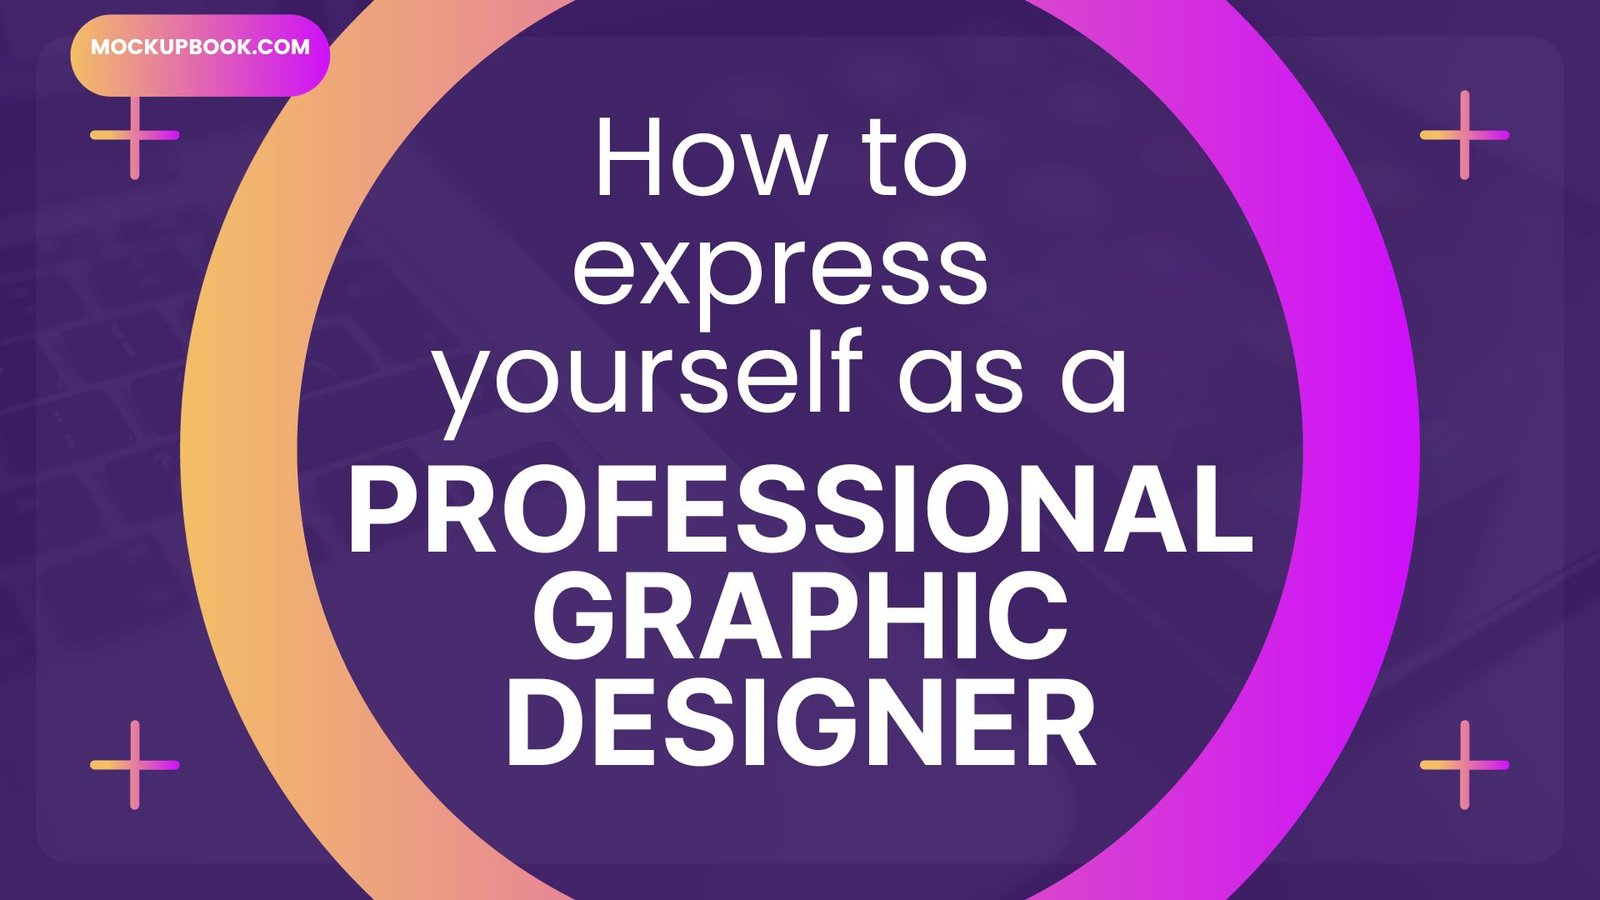 How to Express Yourself as a Professional Graphic Designer